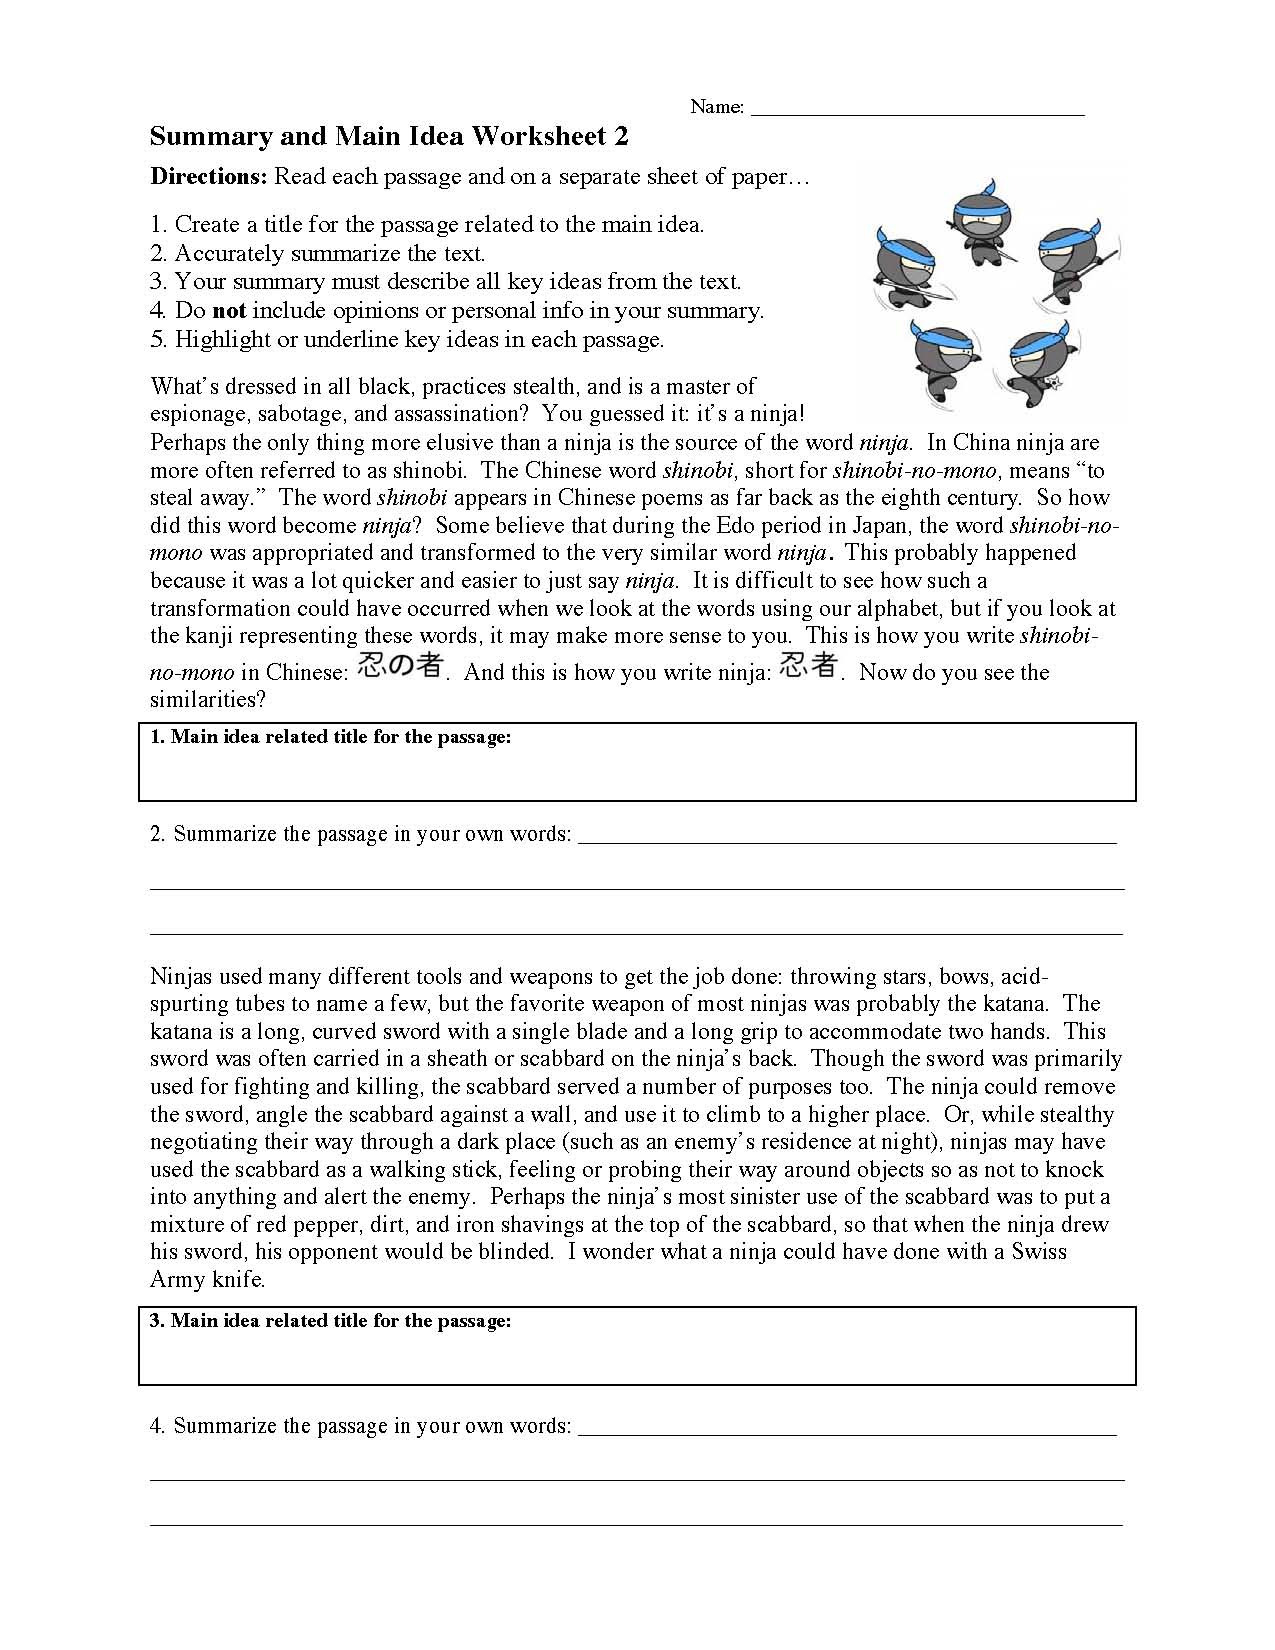 Summary And Main Idea Worksheet 2  Preview